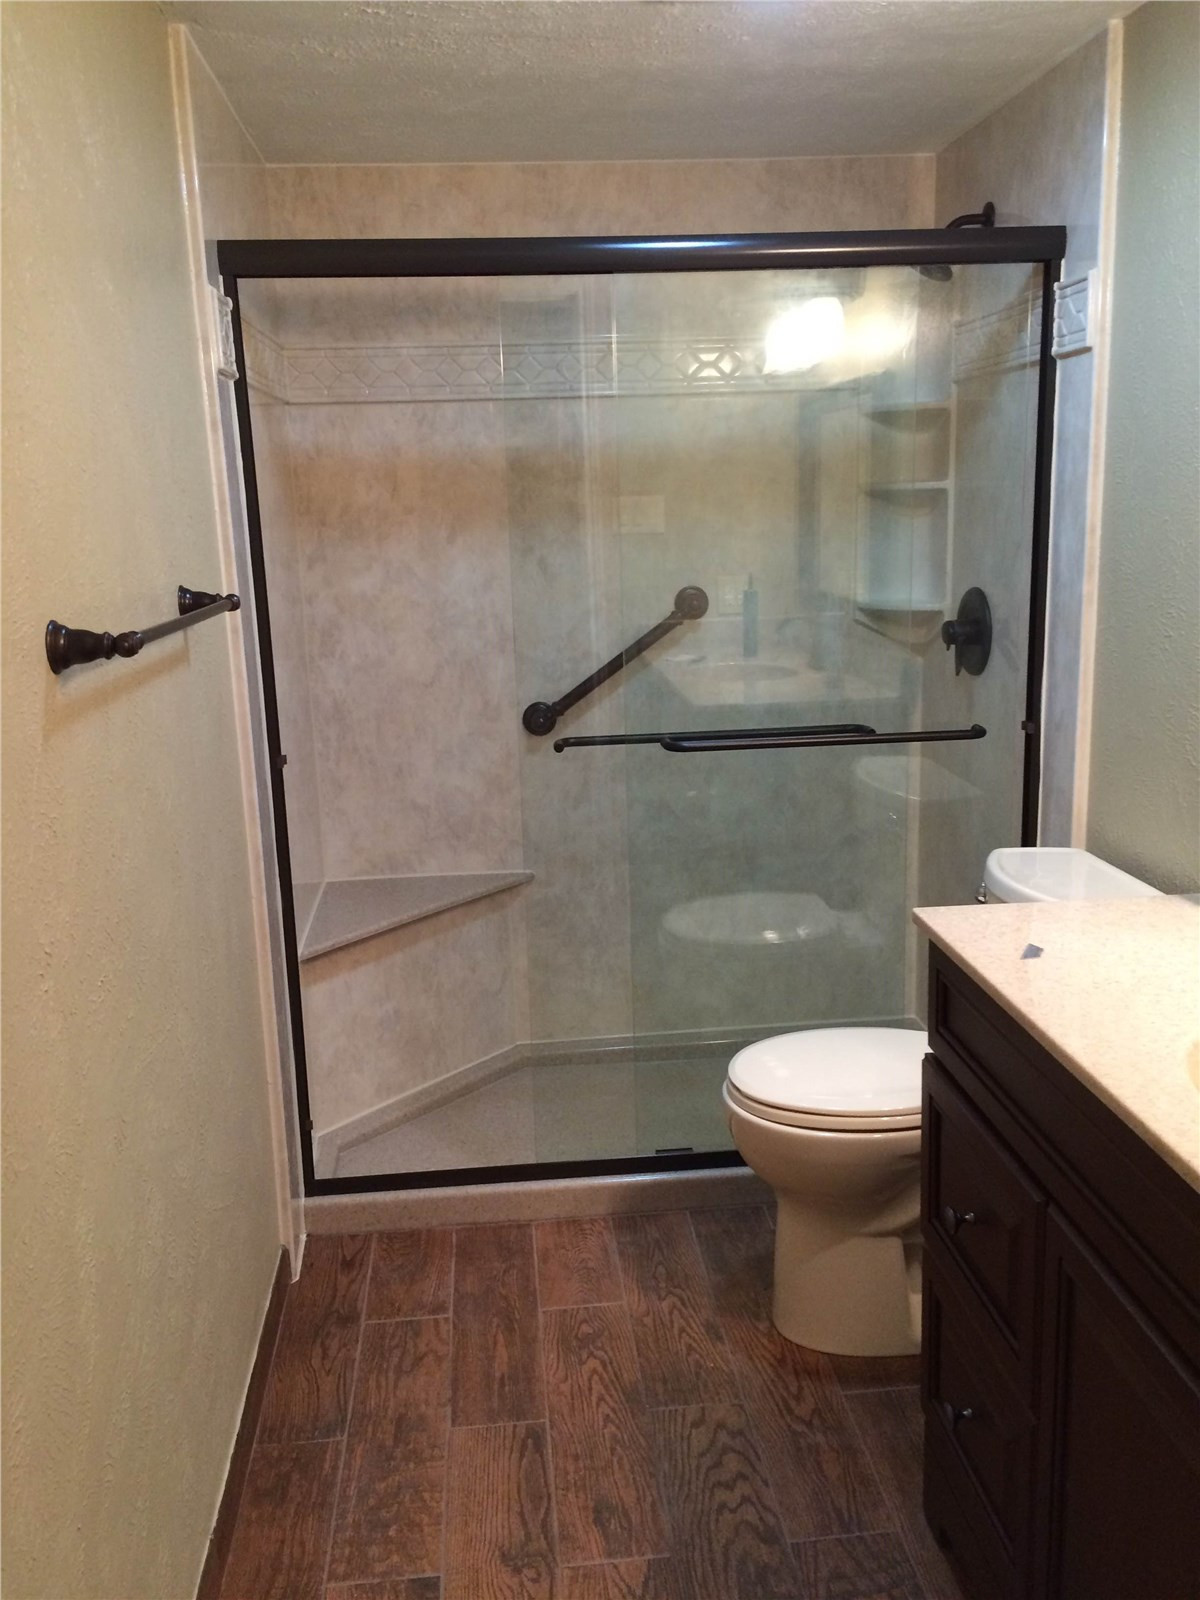 Picture Of Bathroom Showers
 Barrier Free Shower Bath and Shower Remodeling I Chicago